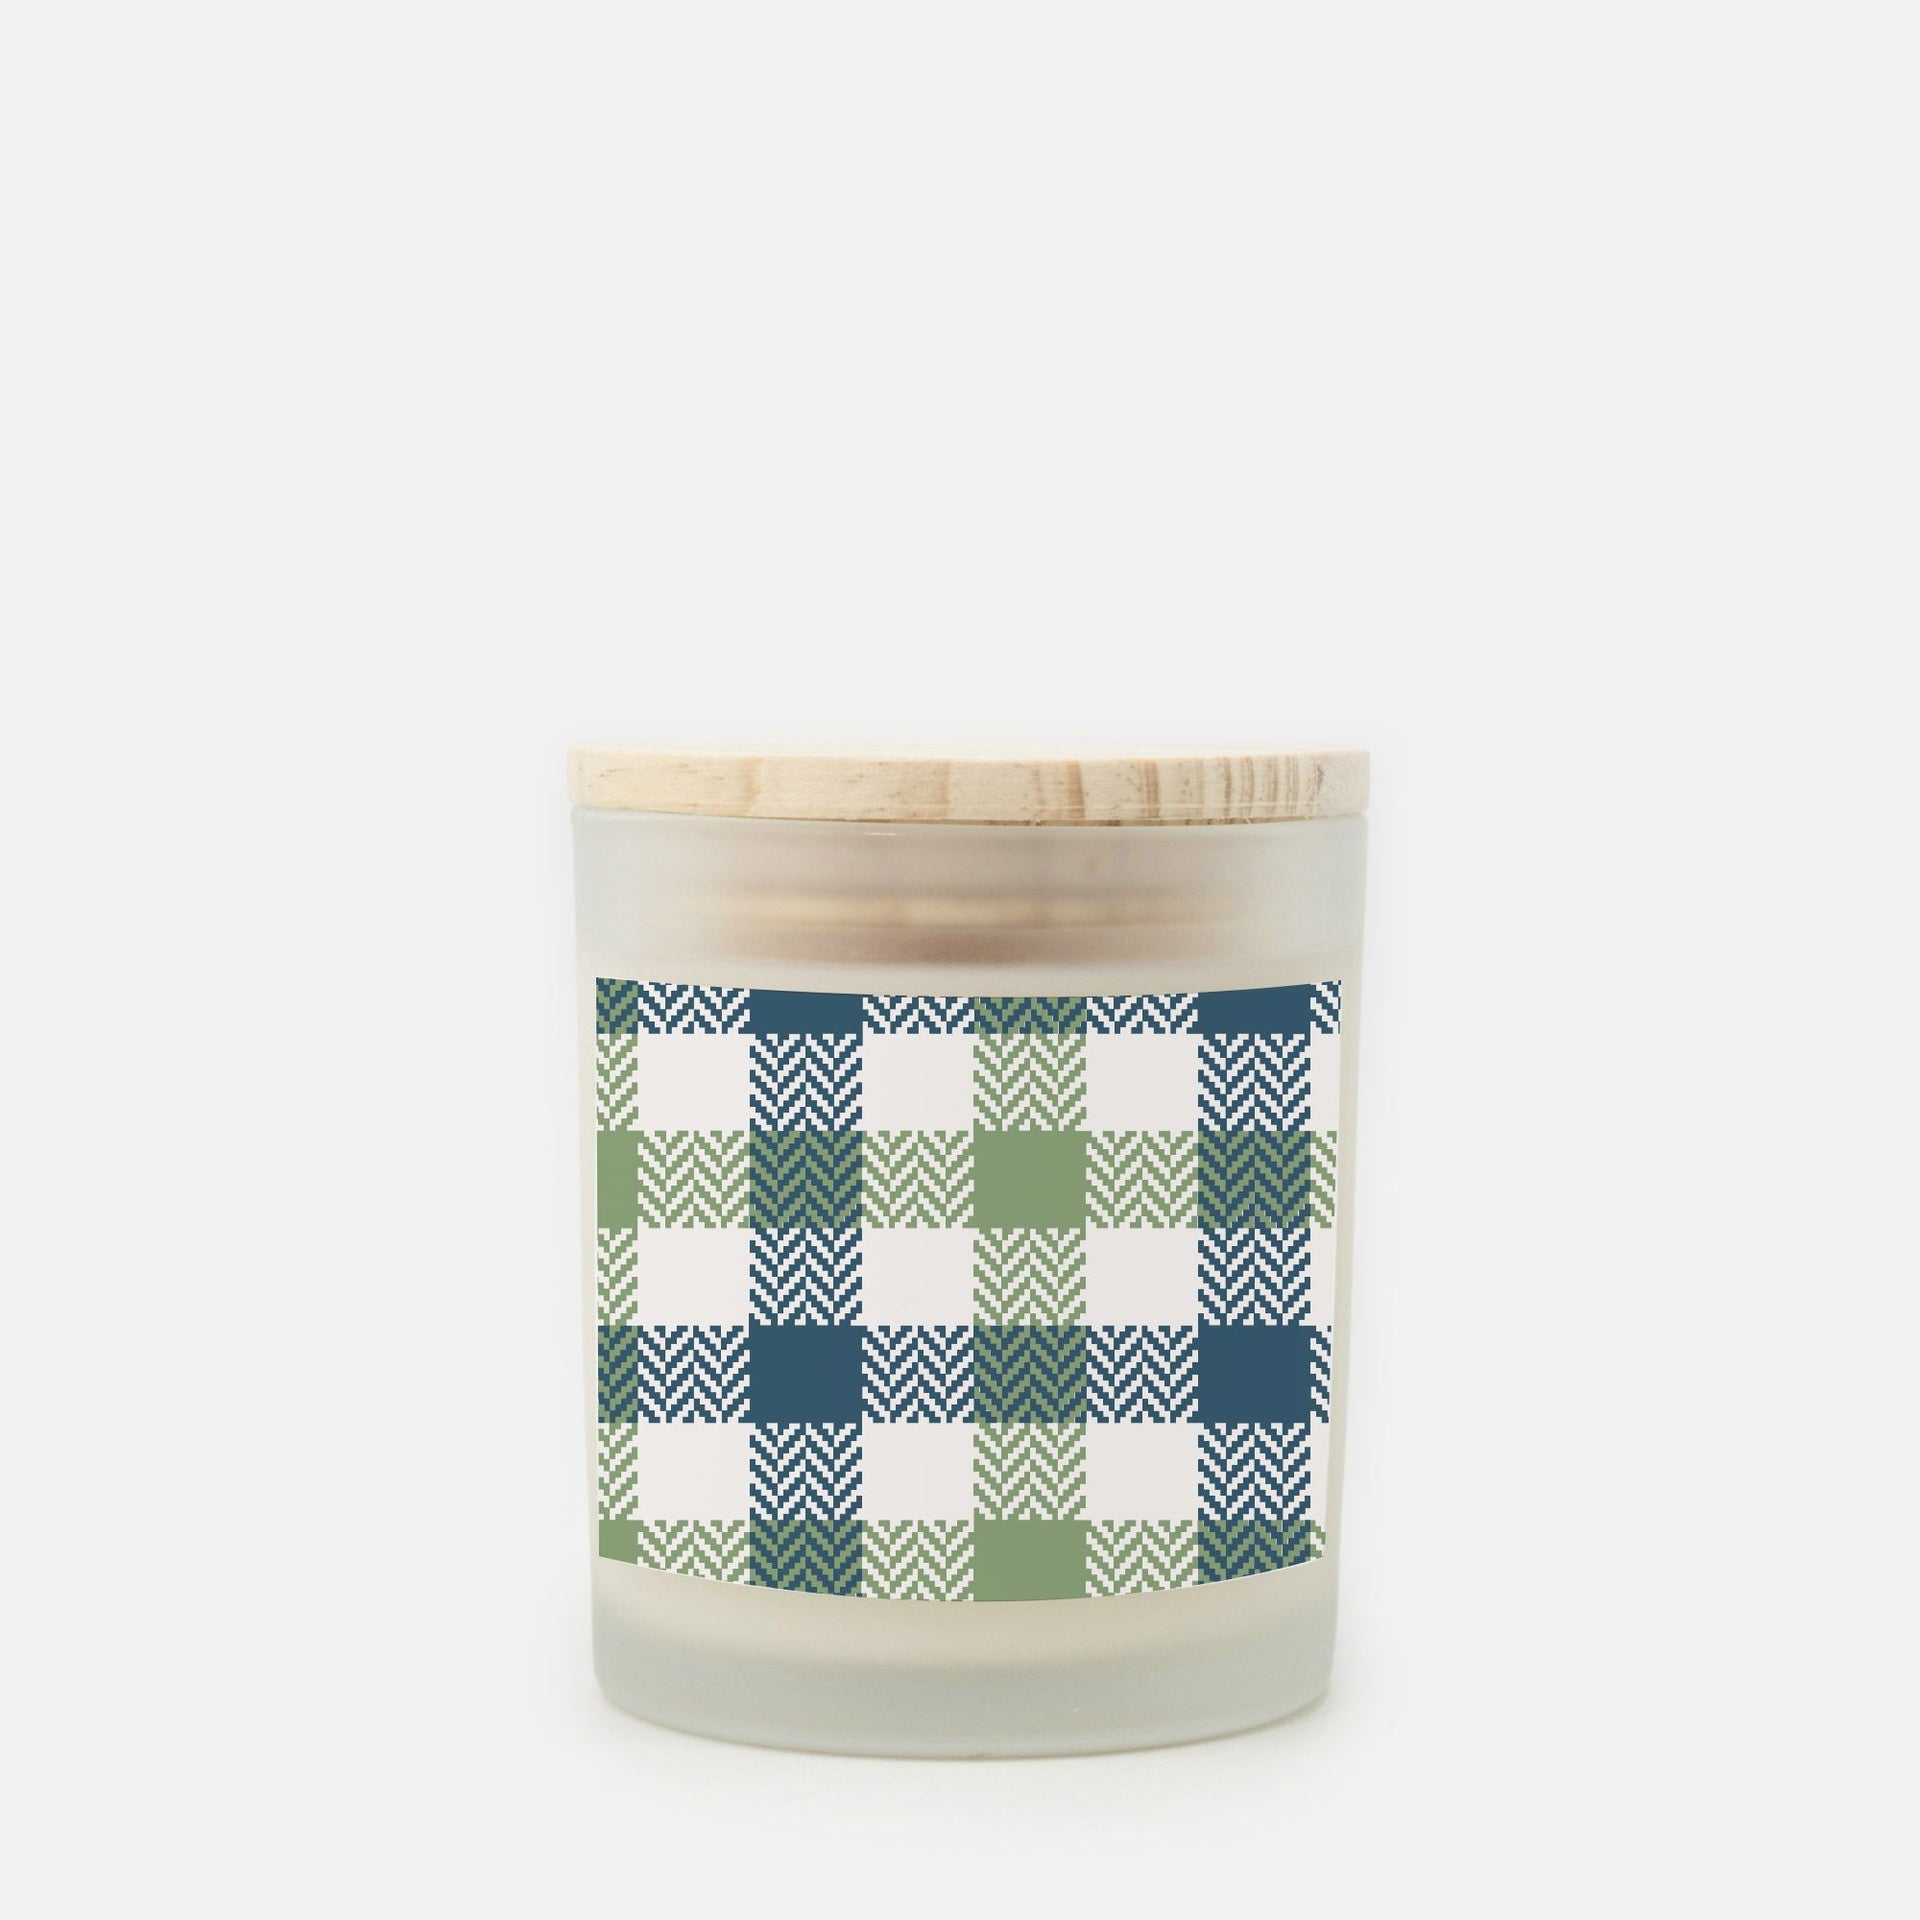 Lifestyle Details - Blue & Green Plaid Frosted Glass Candle - Cashmere Vanilla